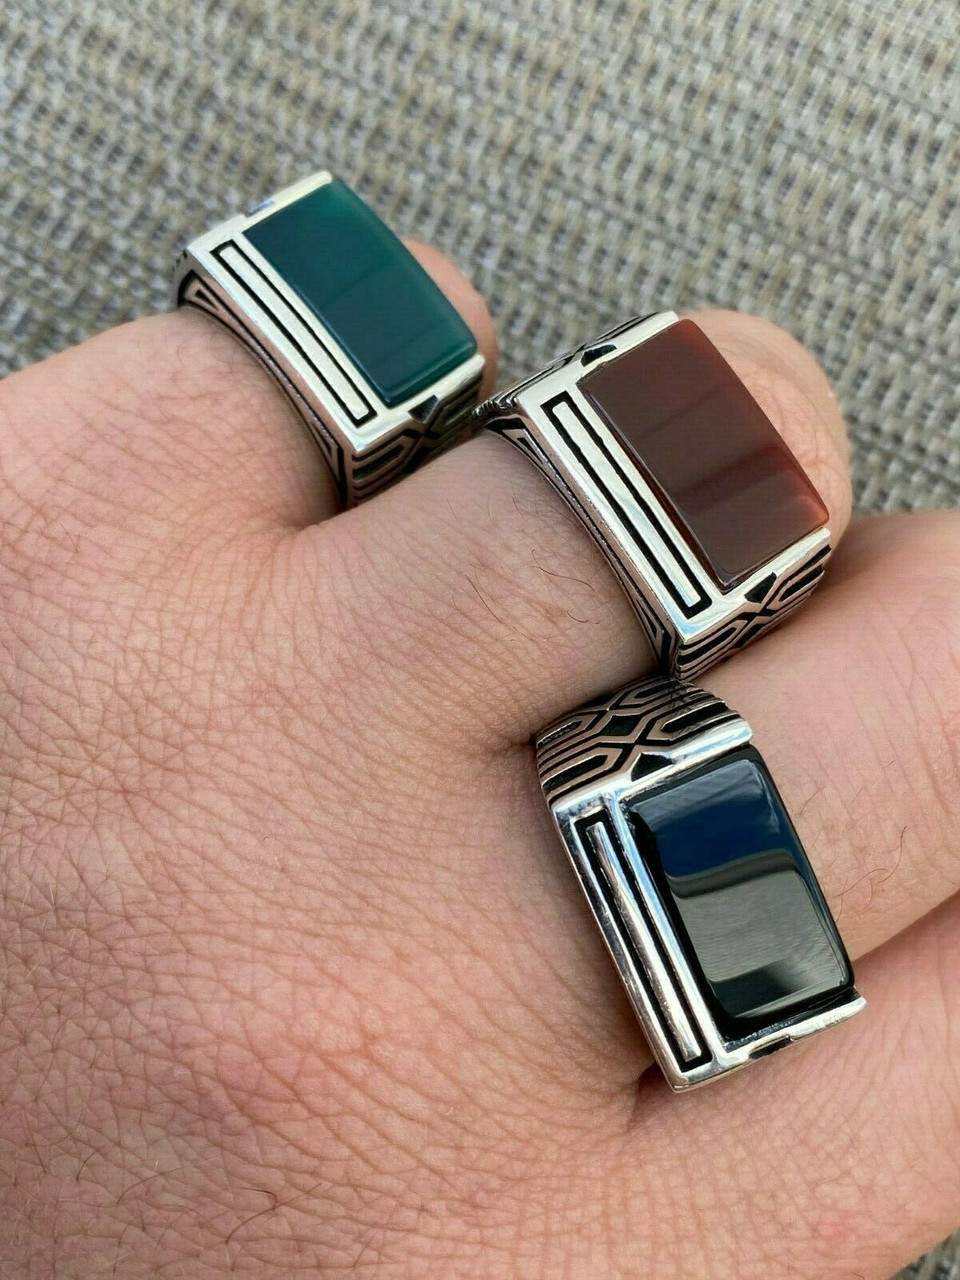 man ring sterling silver 925 all sizes onyx natural agate semi